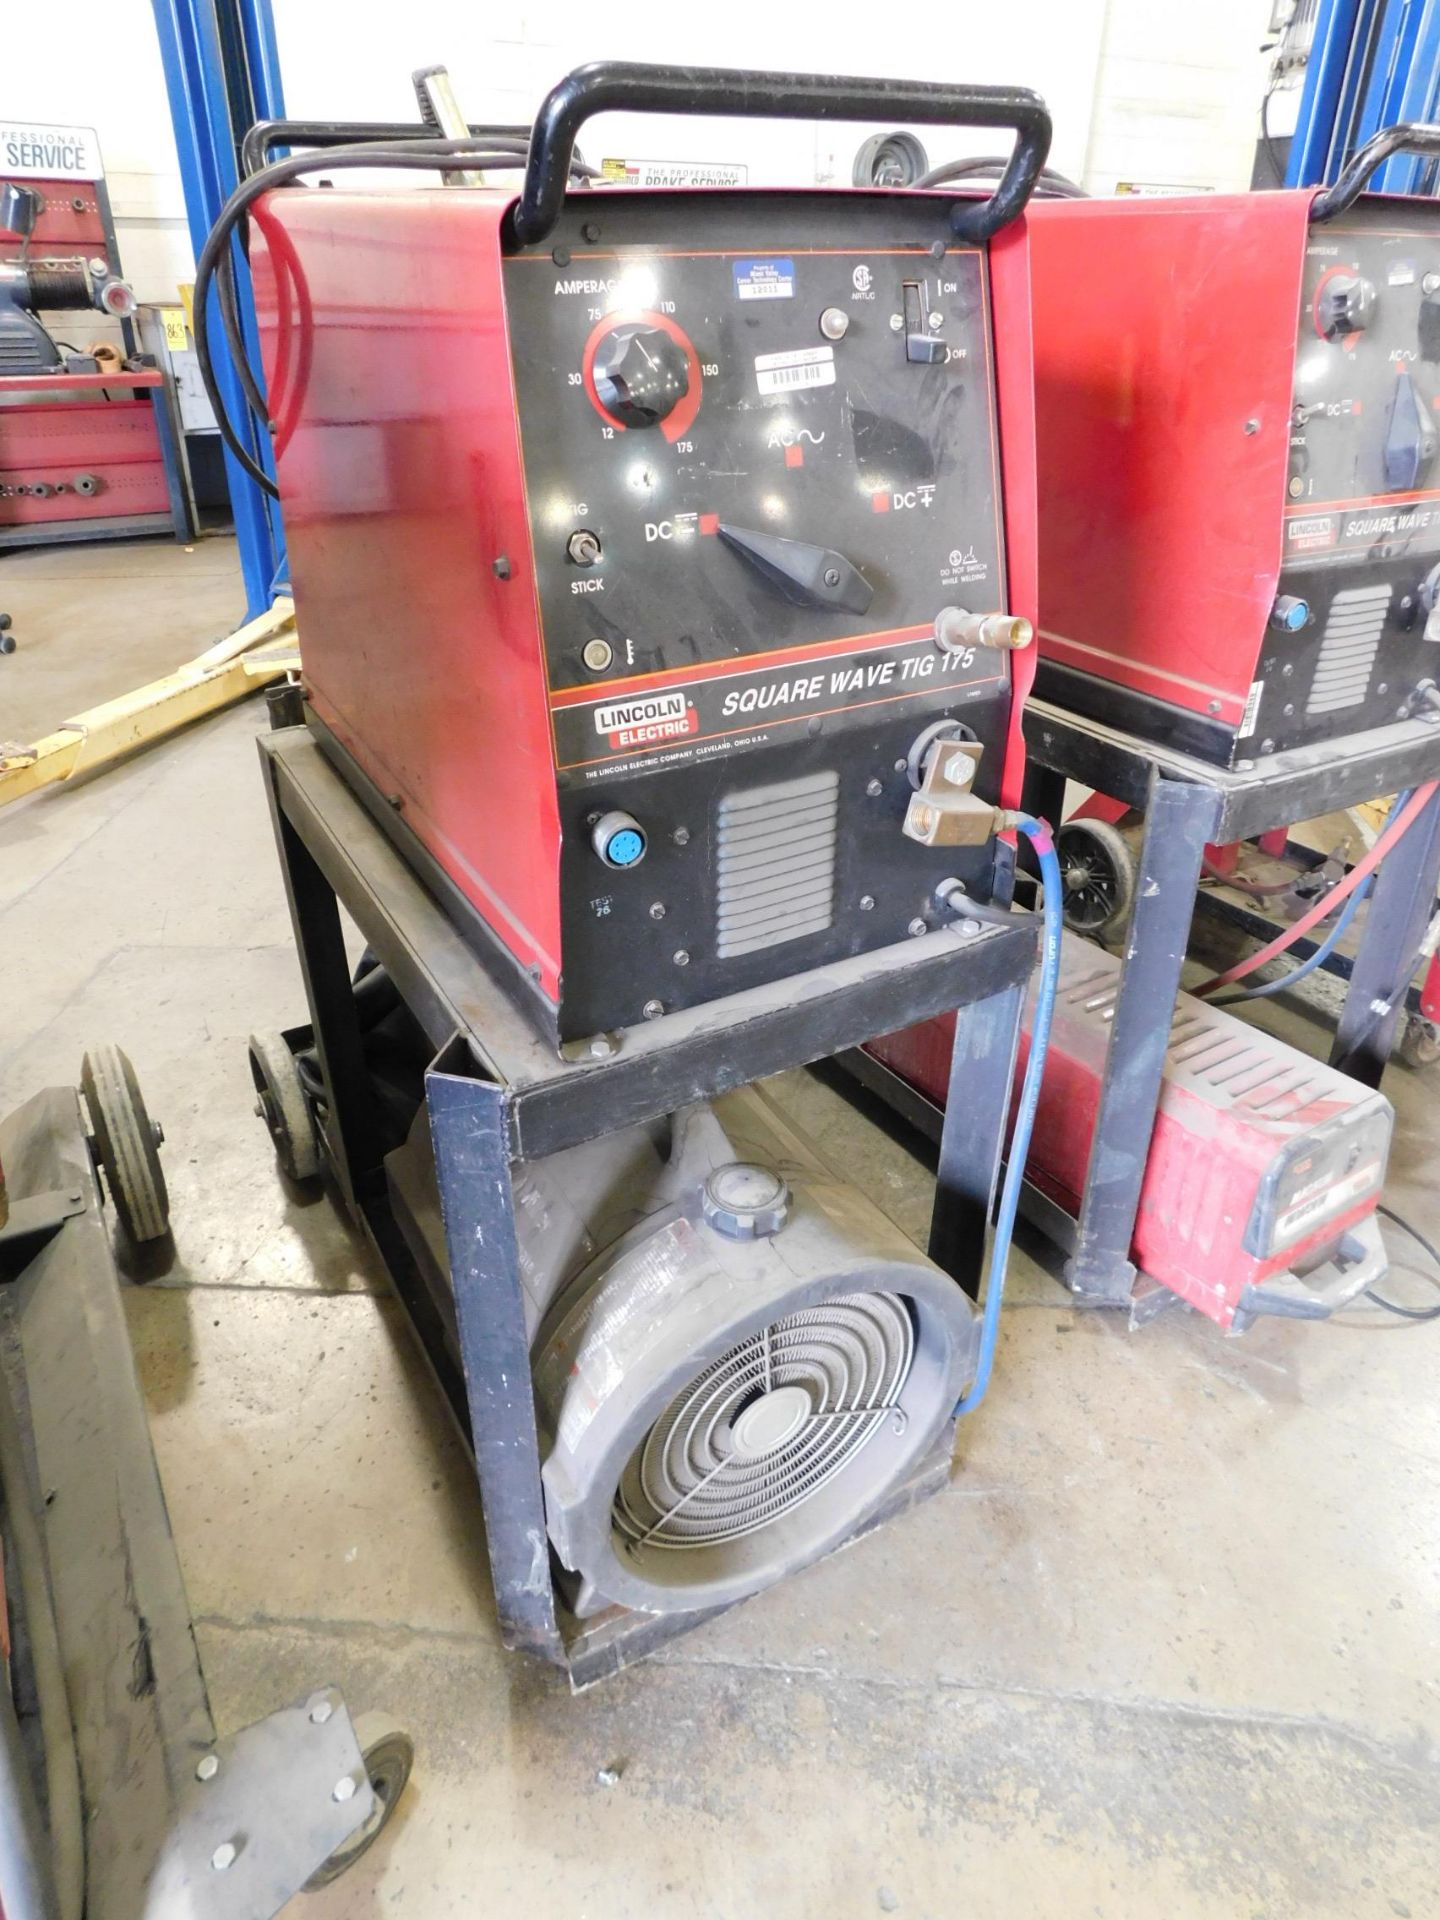 Lincoln Square Wave Tig 175, SN U1960610156 With Miller Coolmate 4 Chiller and Cart, 230V, 1 phs. - Image 2 of 4